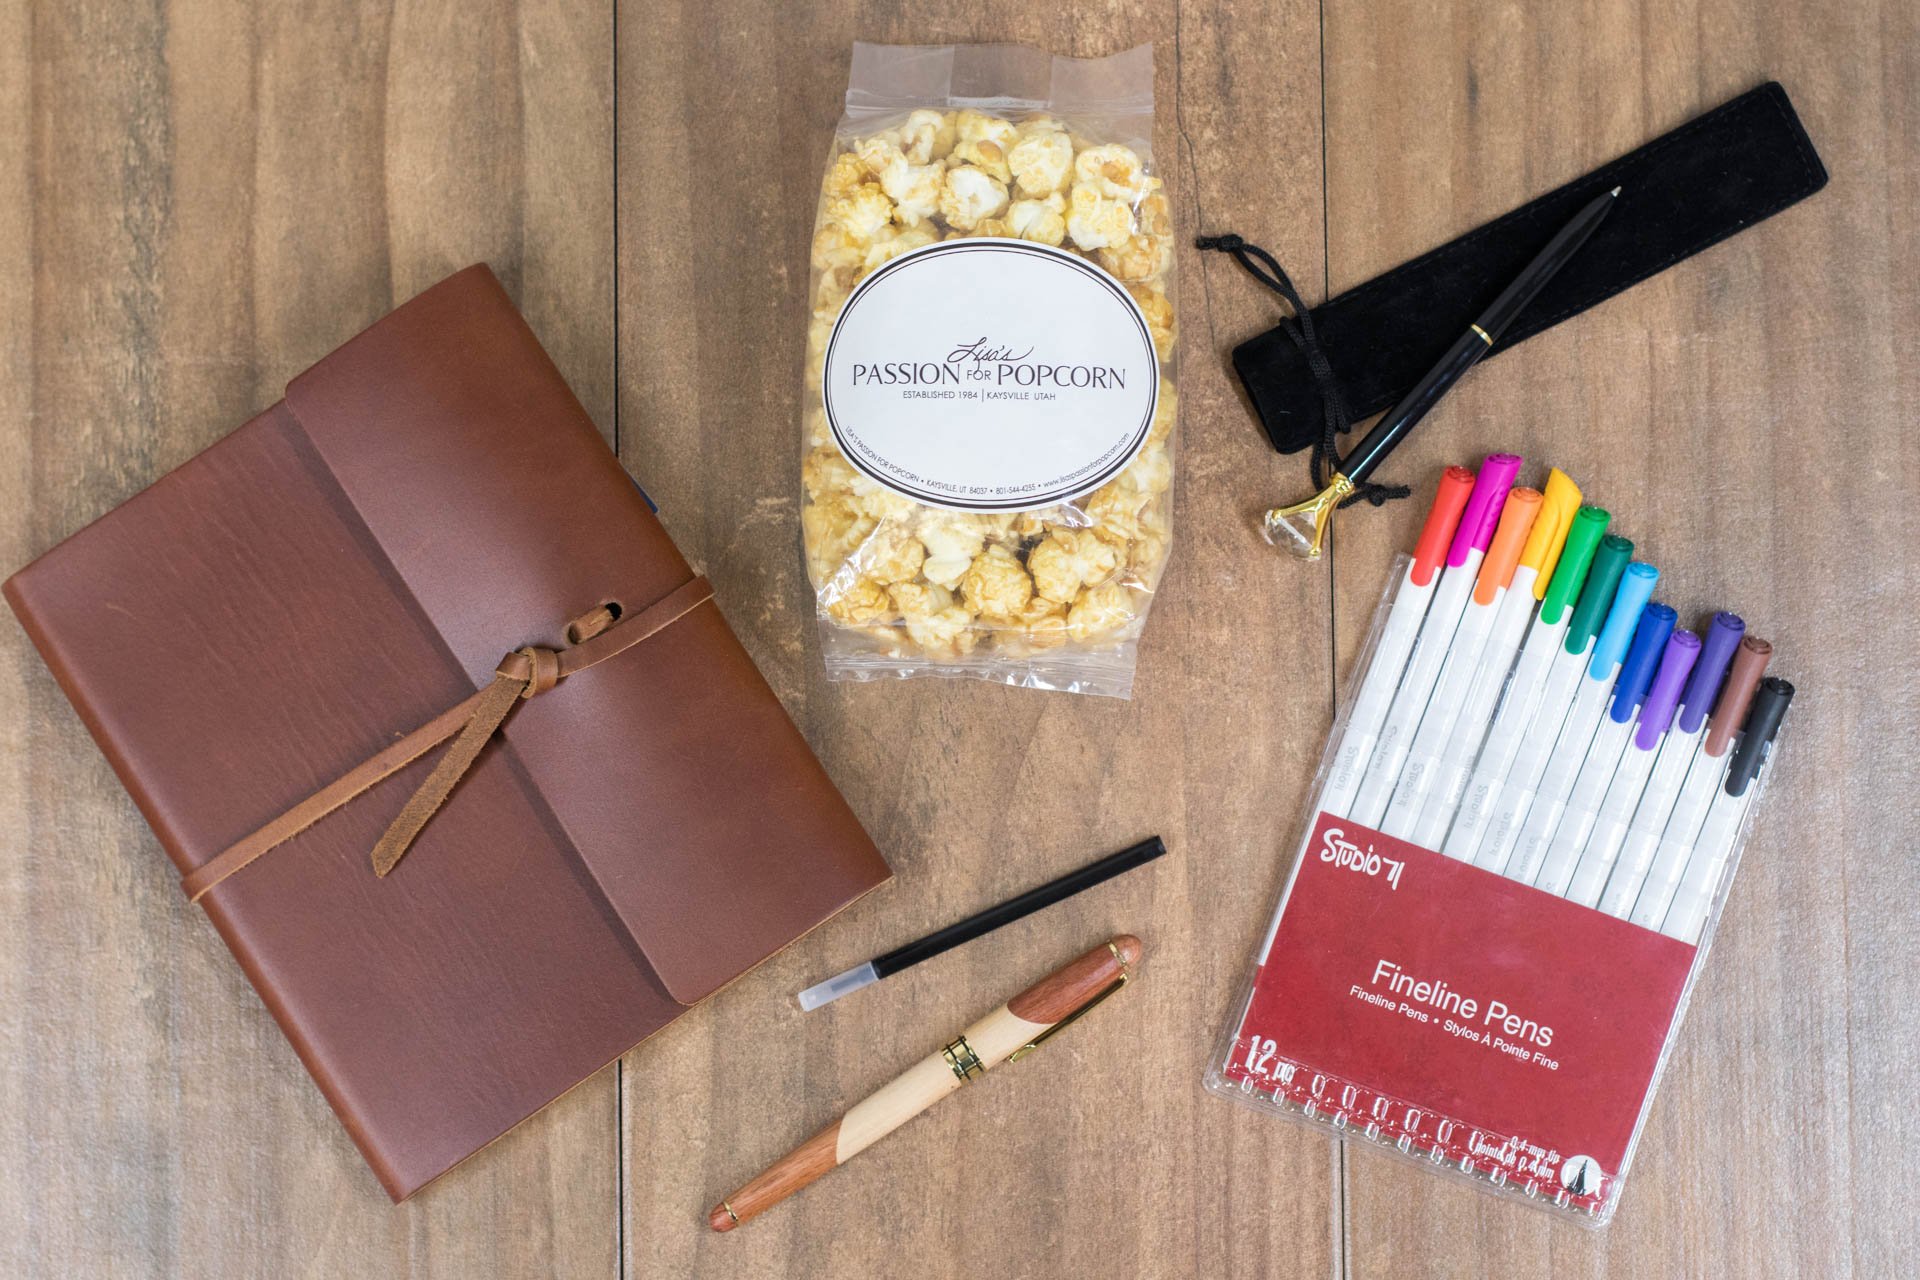 Leather Journal Housewarming Gift | BrilliantGifts.com